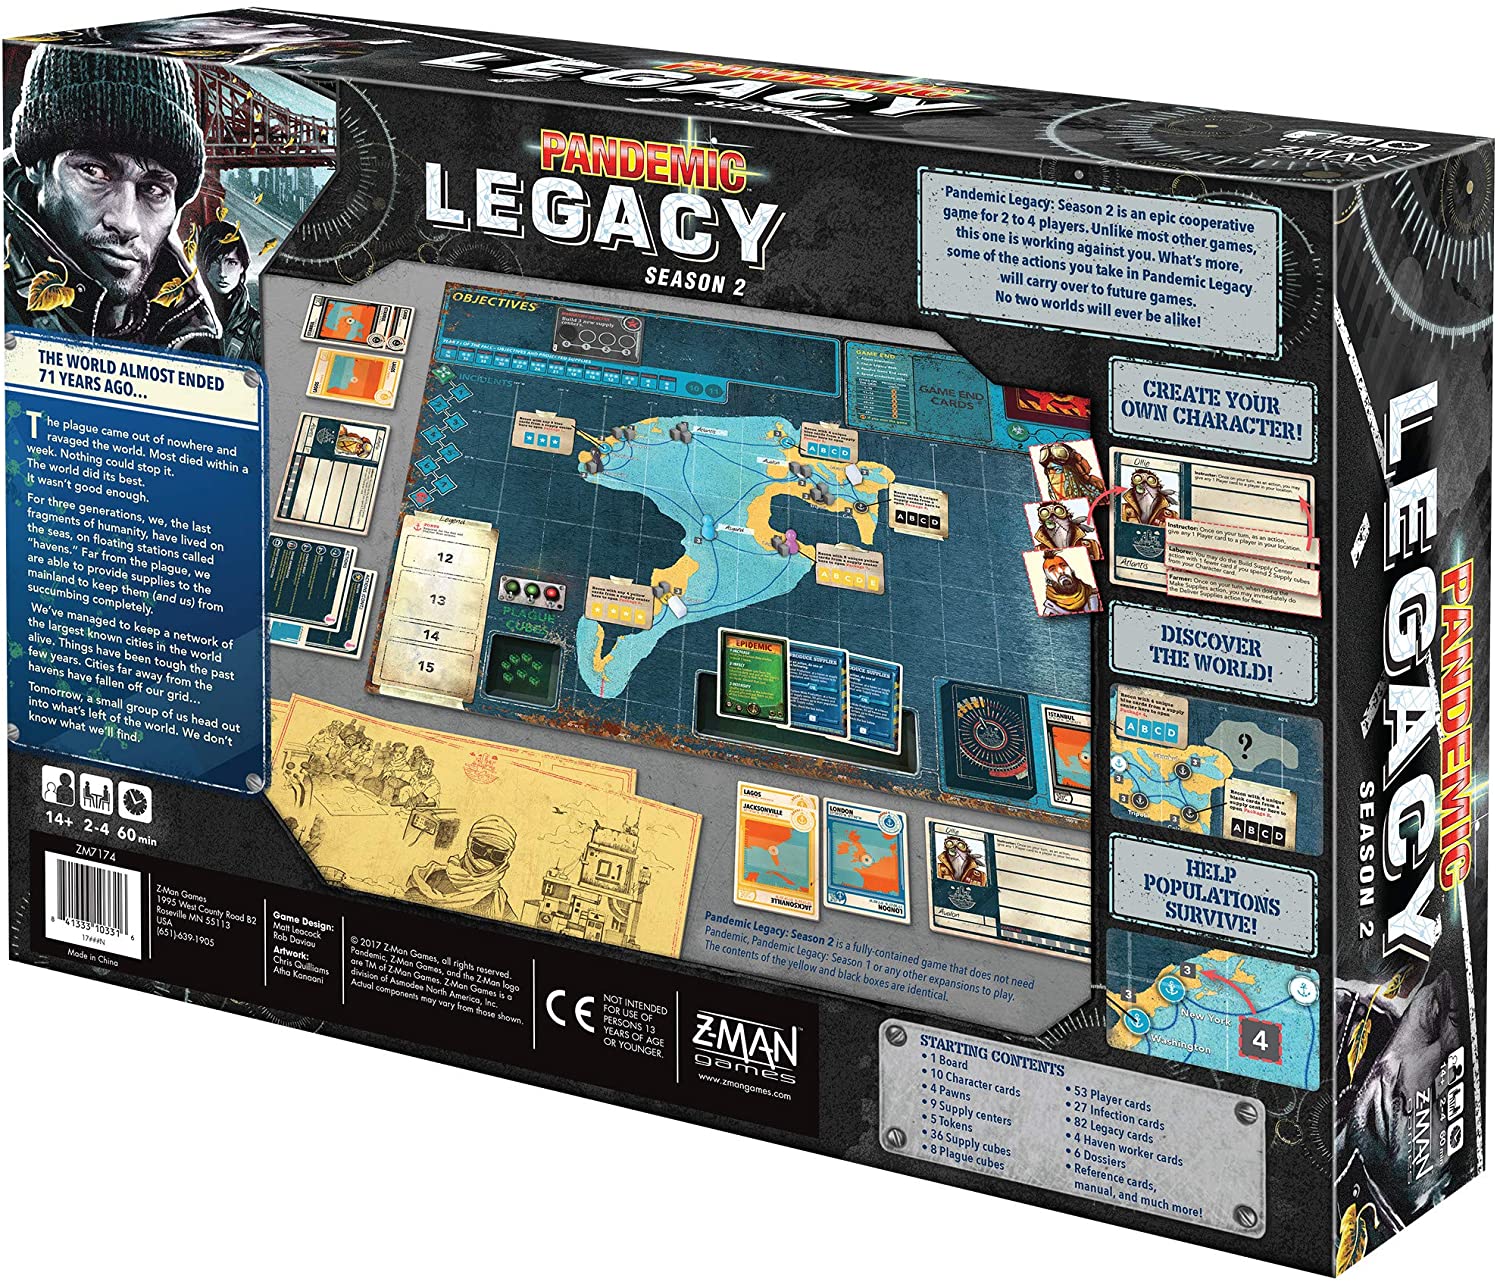 Find out about Pandemic Legacy: Season 2